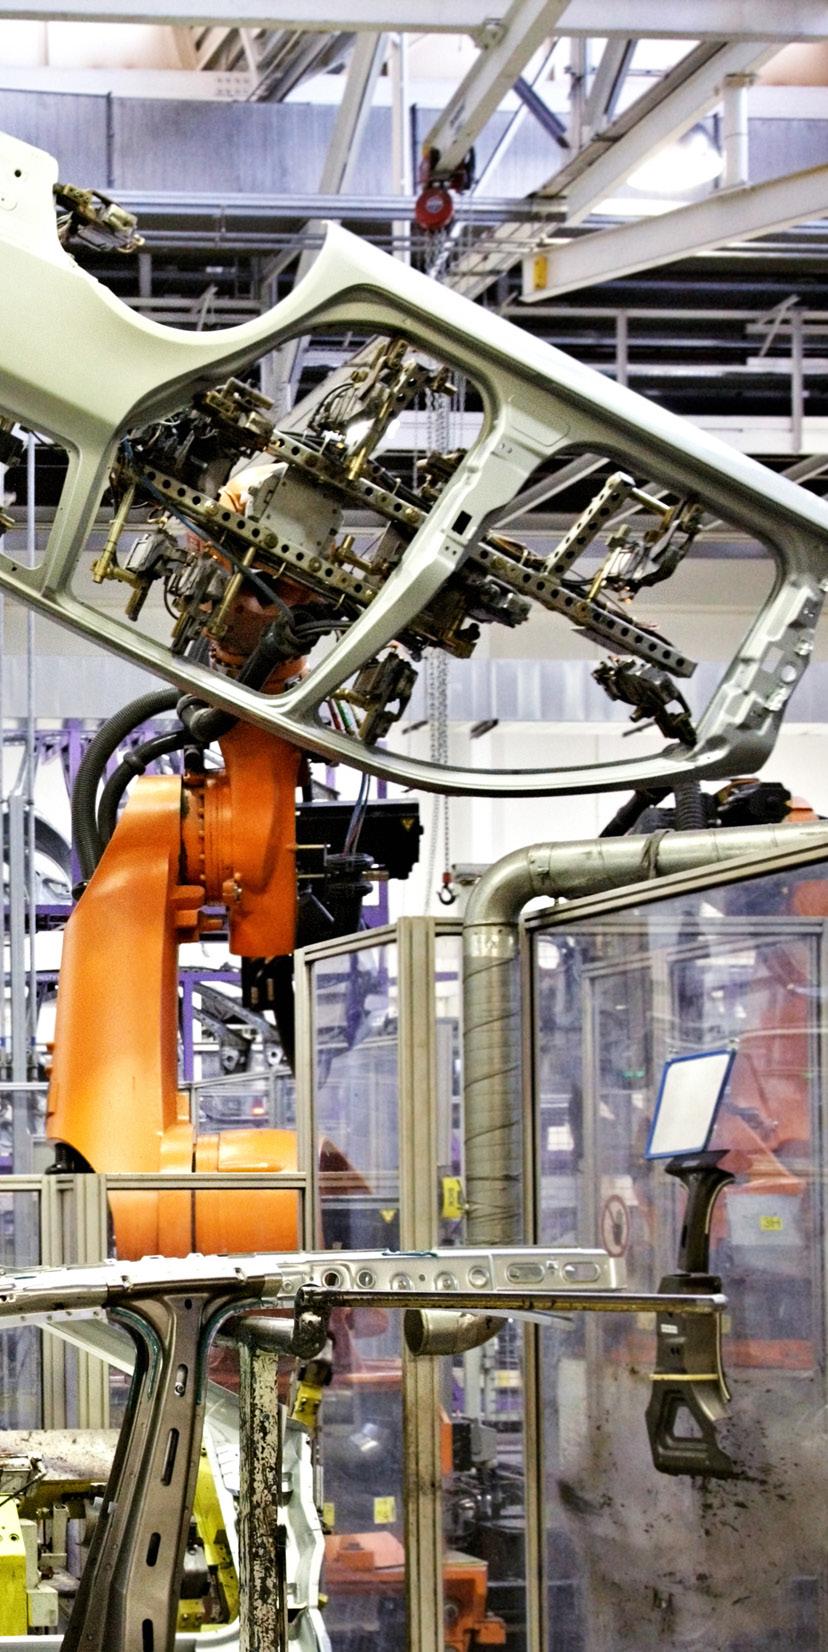 INTRODUCTION OF AUTOMATION & CONTROL Today, manufacturing has to be more of everything: more reliable, more automated, more flexible, more scalable, more decentralized. More connected.